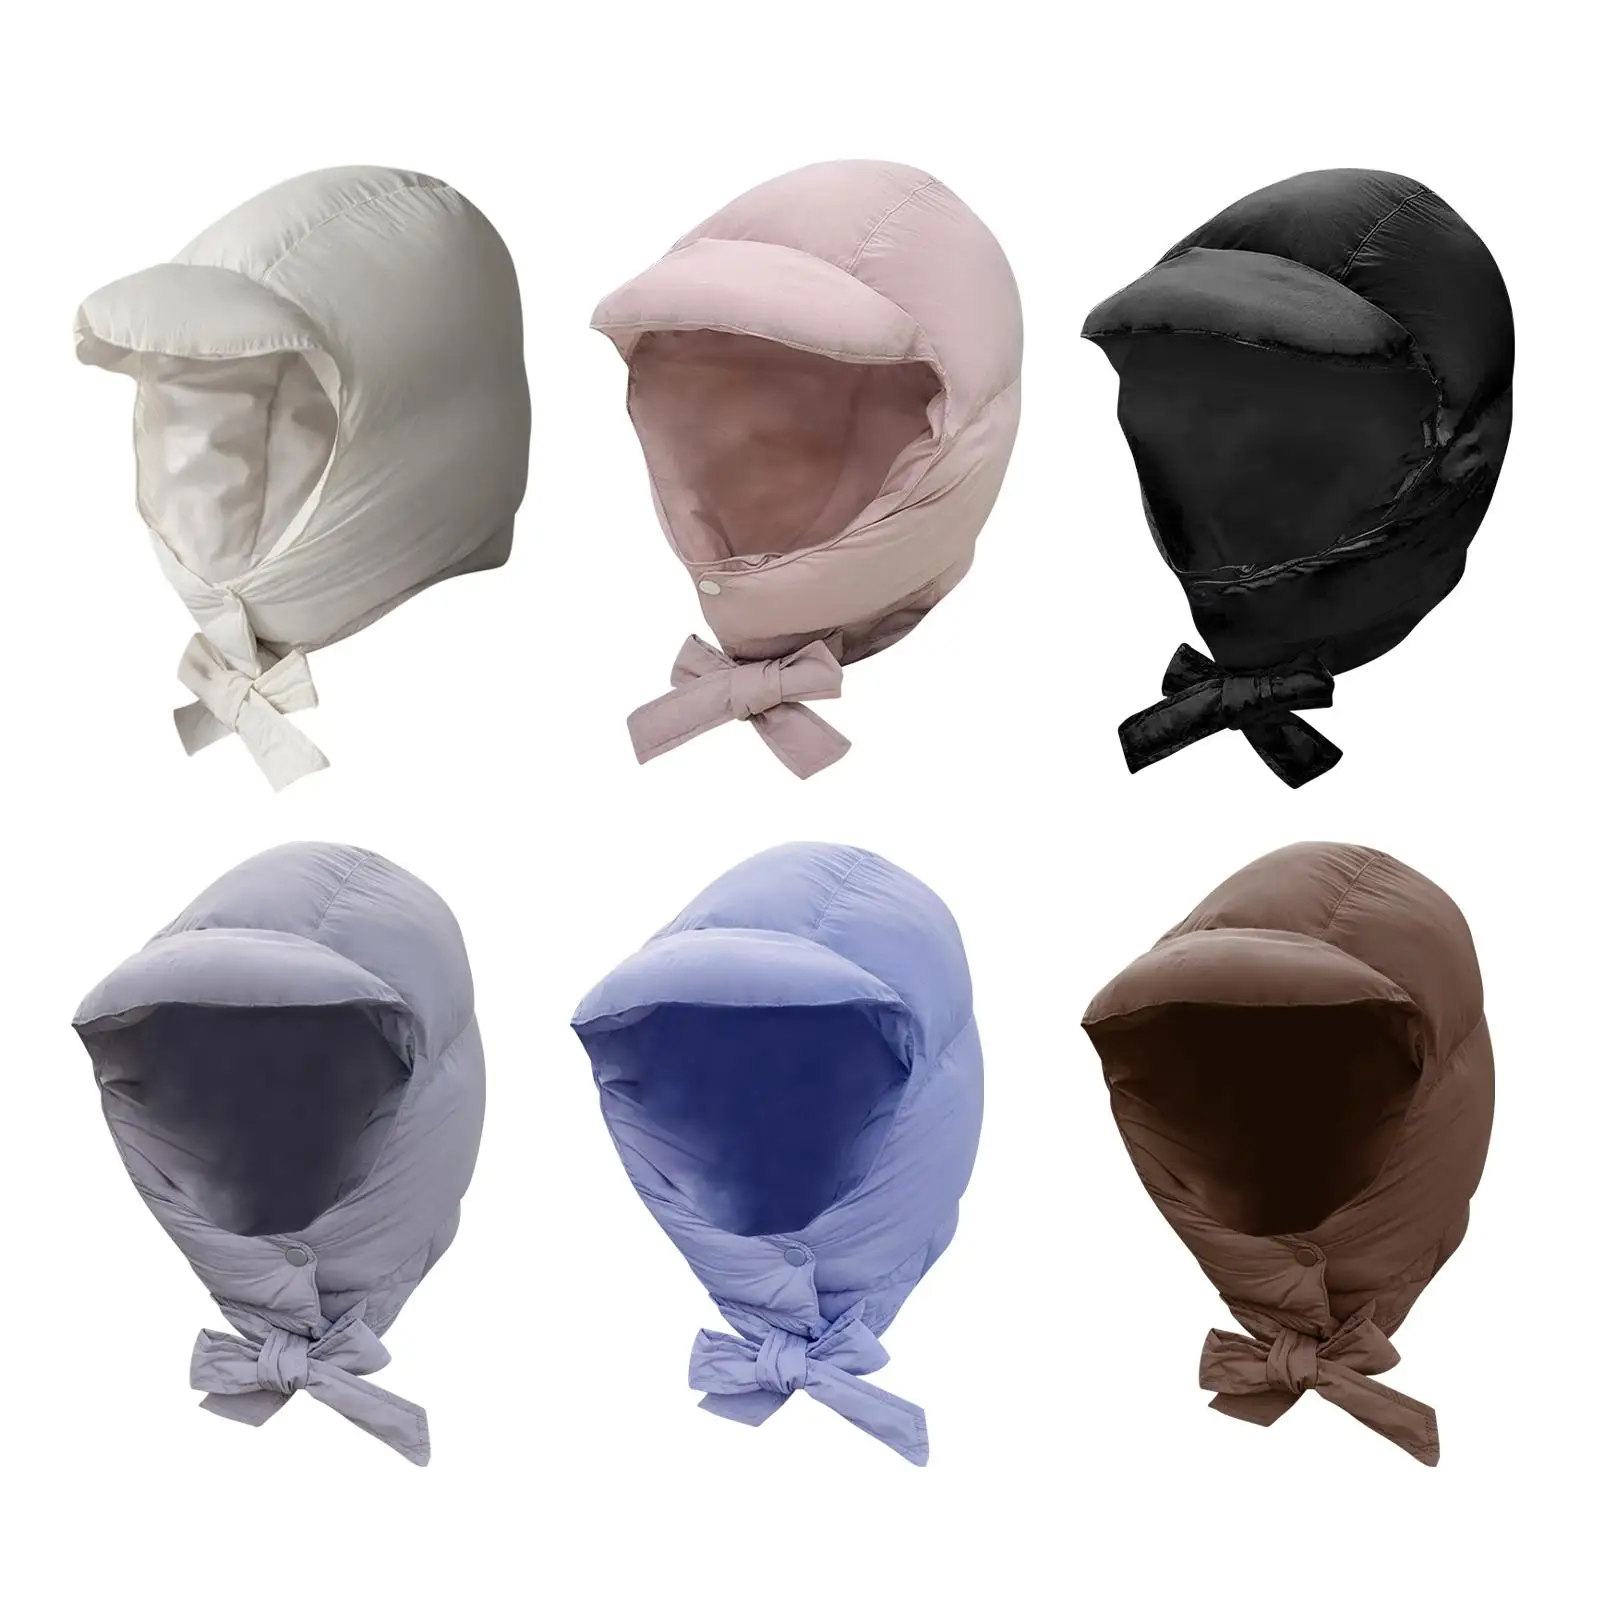 Down Hat with Ear Flaps Comfortable for Women Ear Protection Windproof Warm Hat for Skating Motorcycle Snow Sports Skiing Hiking